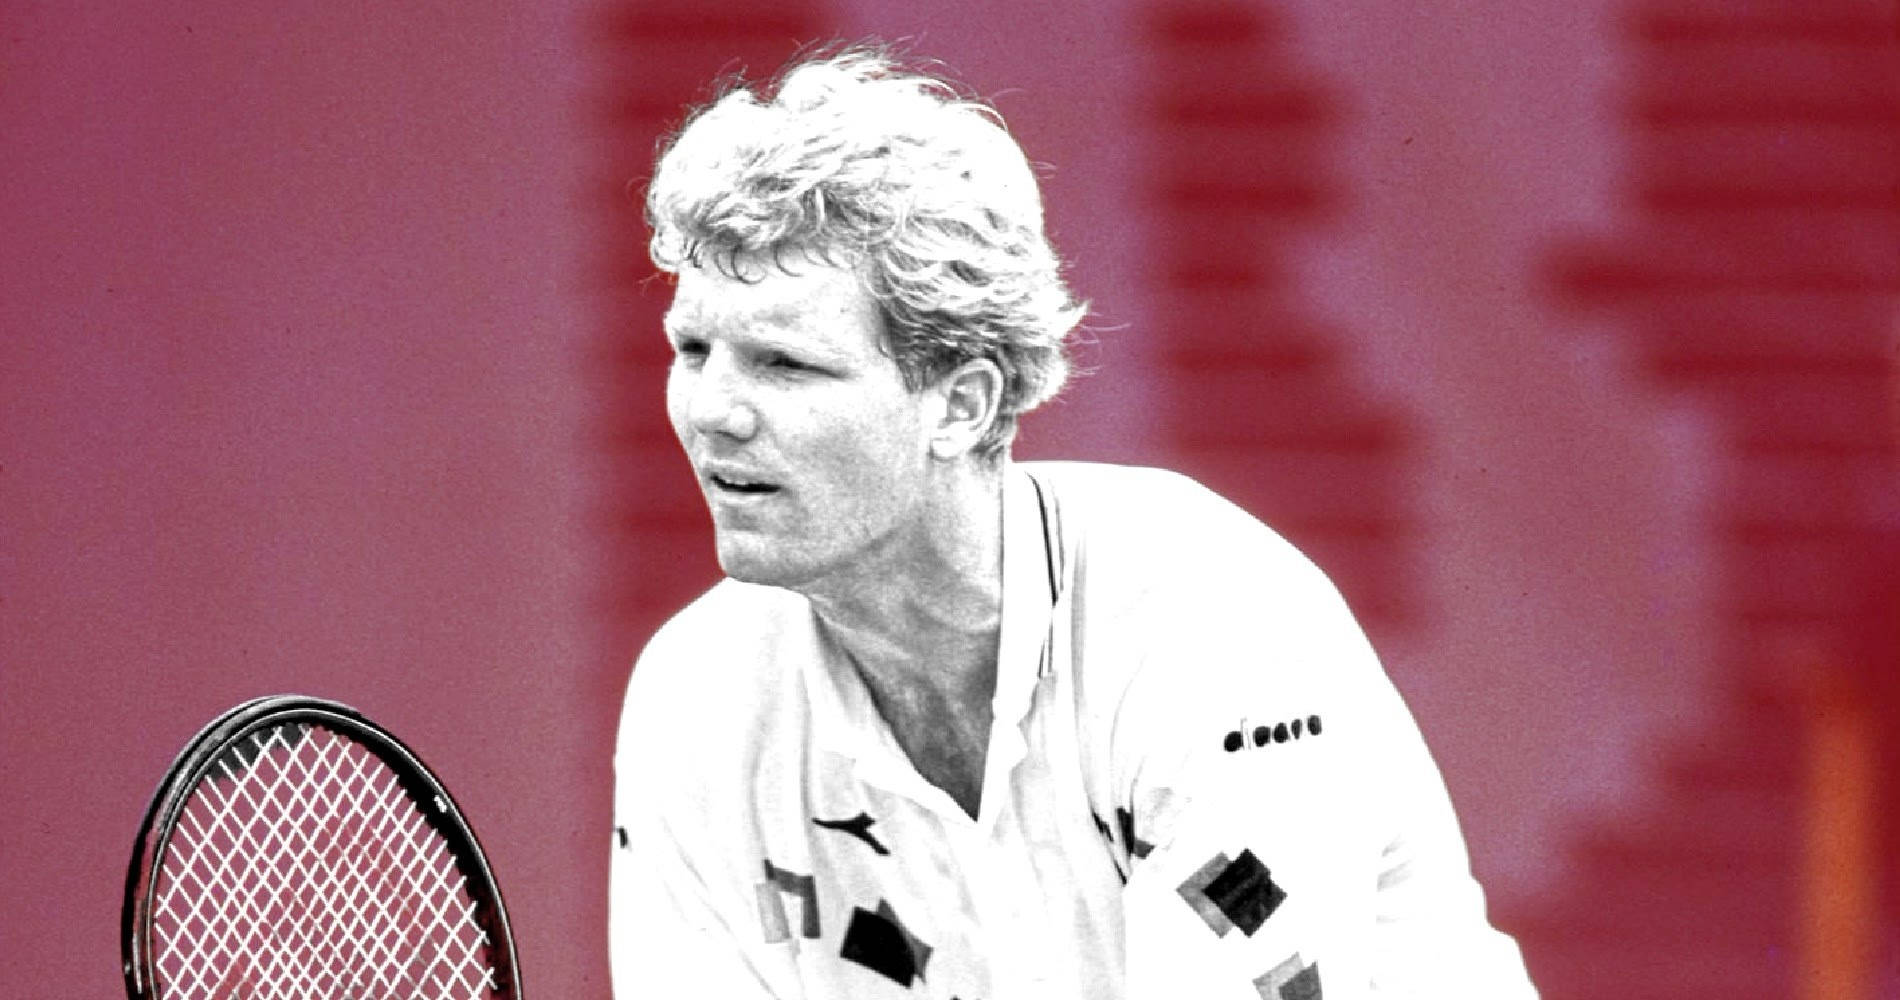 Jim Courier showcasing his skills during his early days in tennis Wallpaper